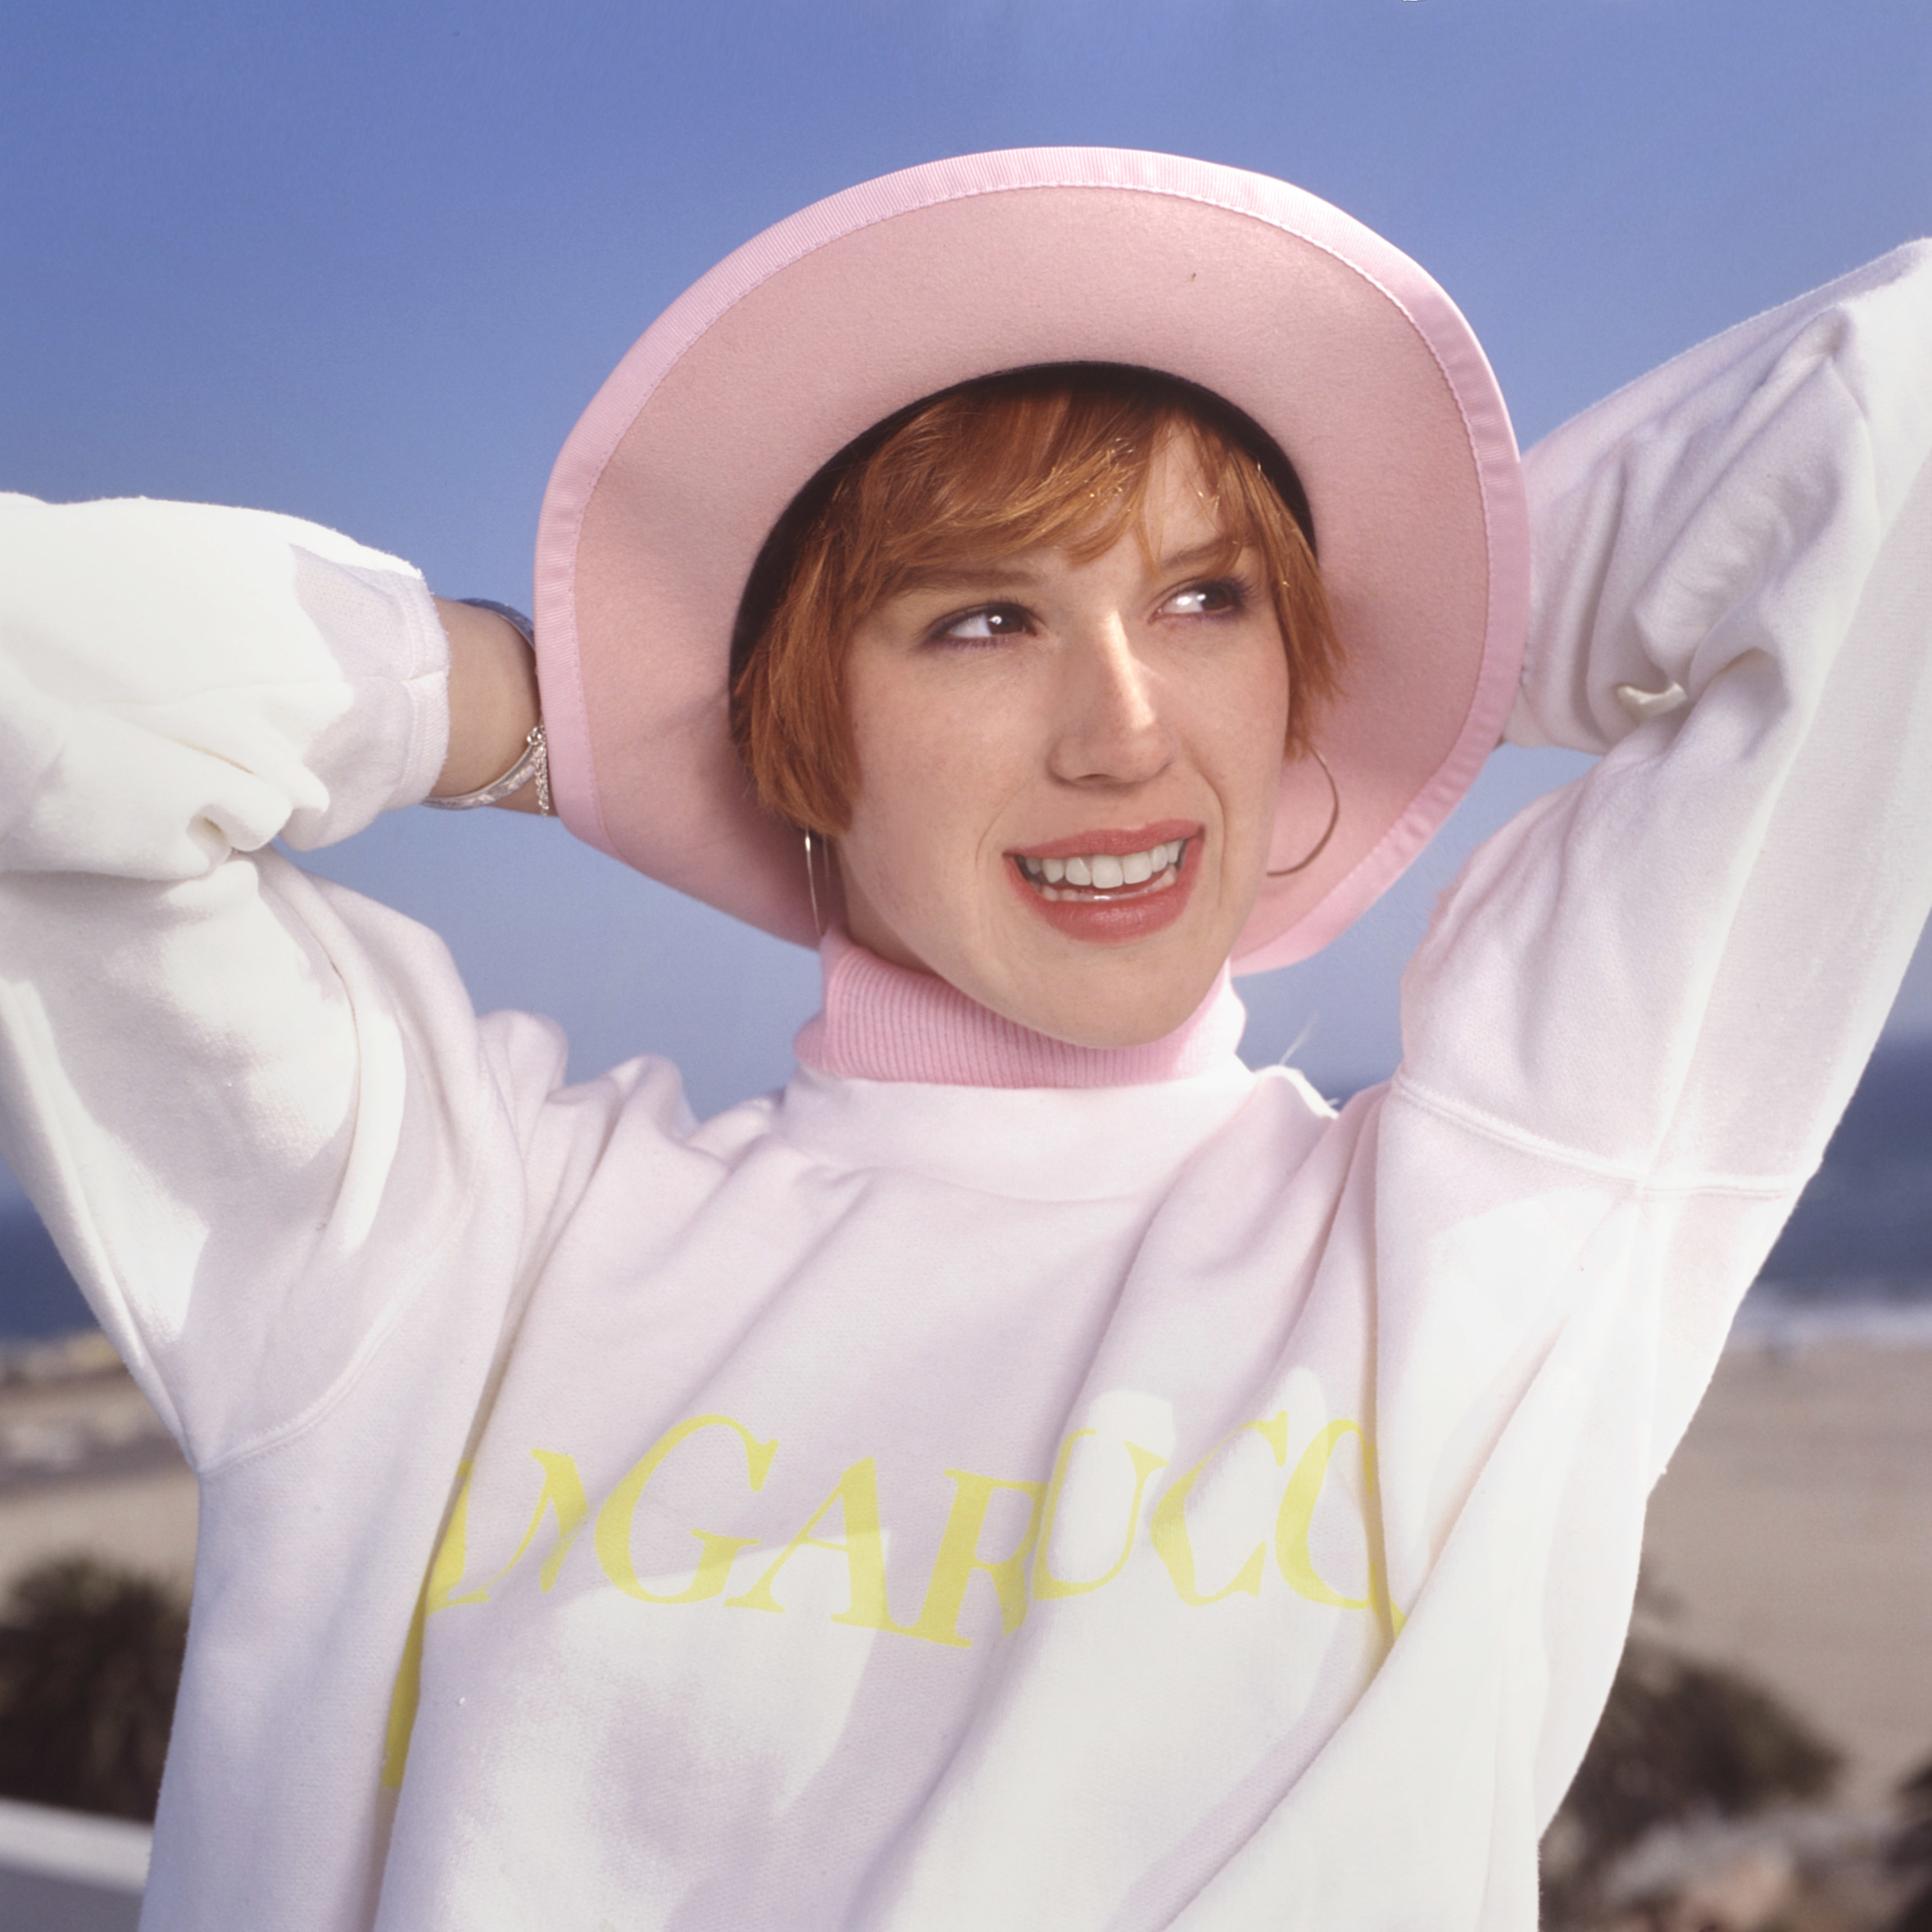 Molly Ringwald in a pink hat and white sweatshirt with text on it, smiling against a sky backdrop